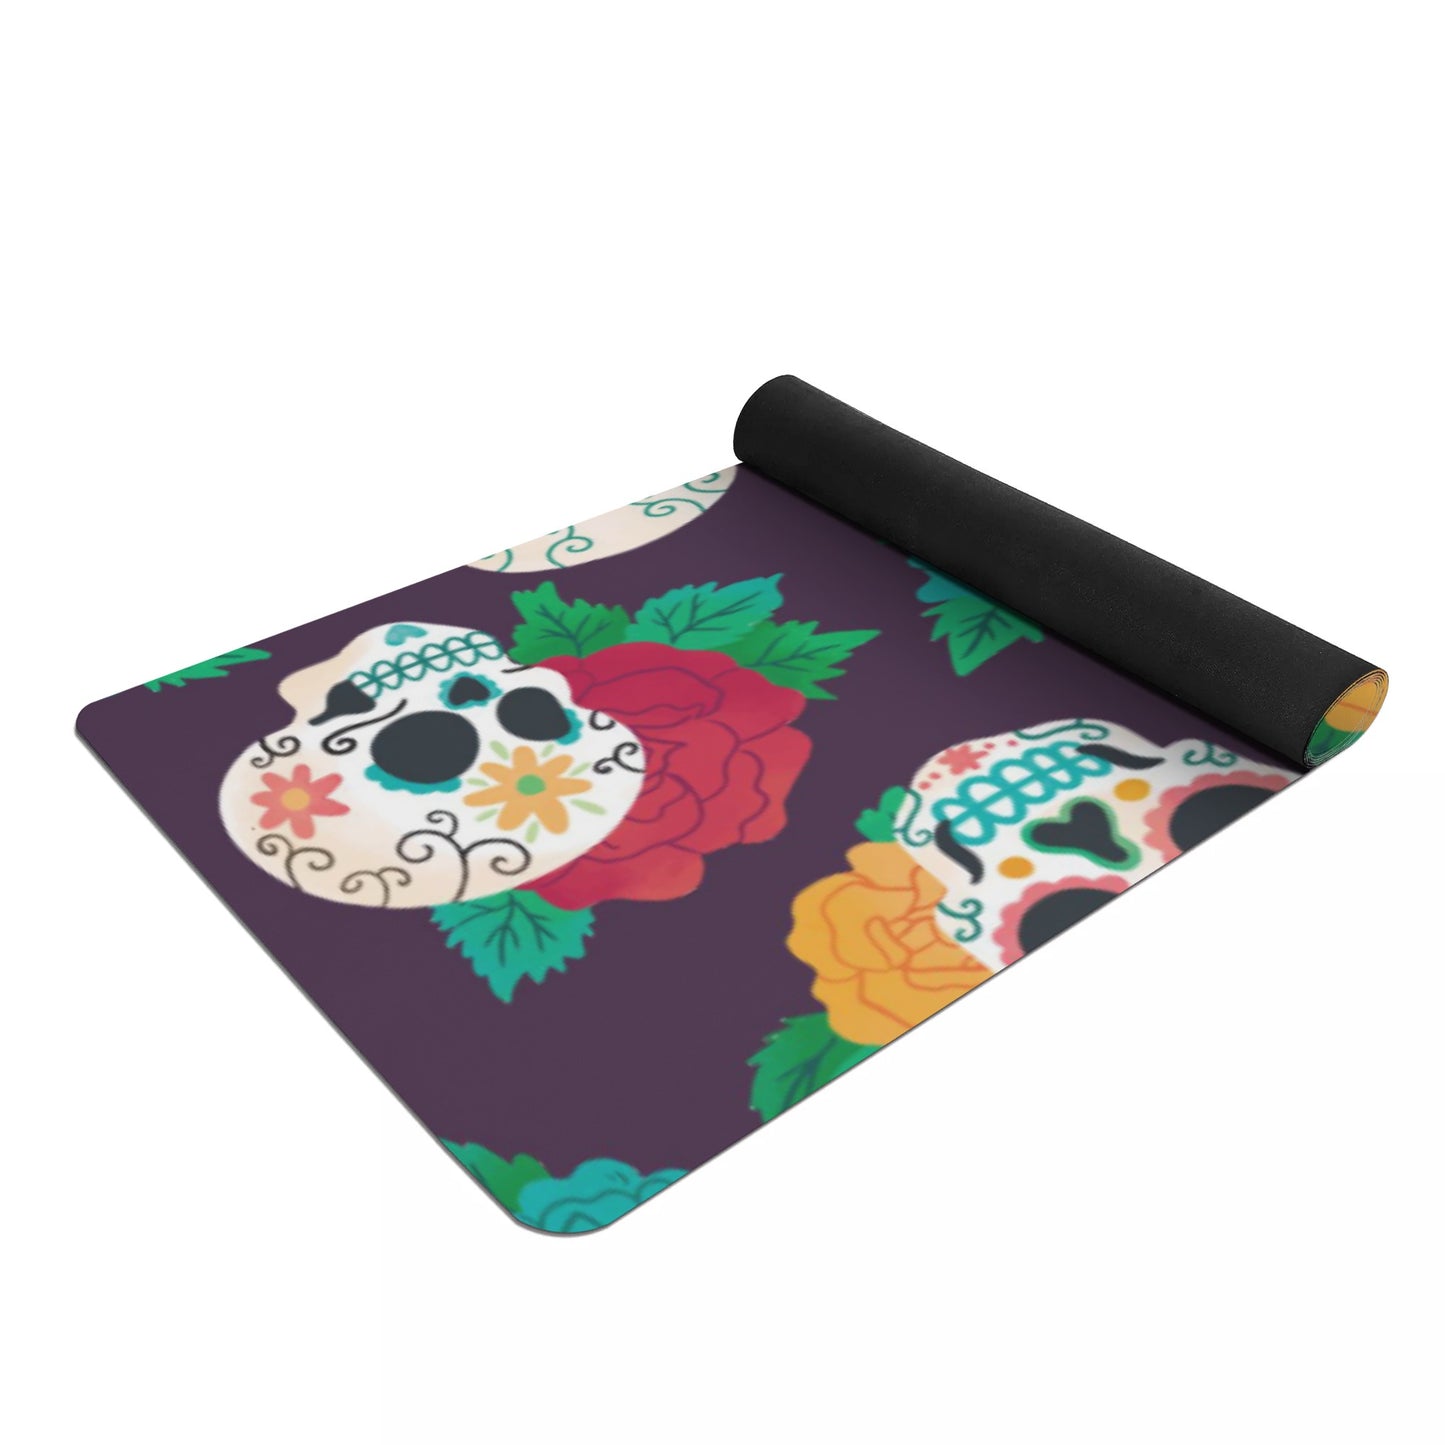 Floral sugar skull day of the dead Rubber Yoga Mat